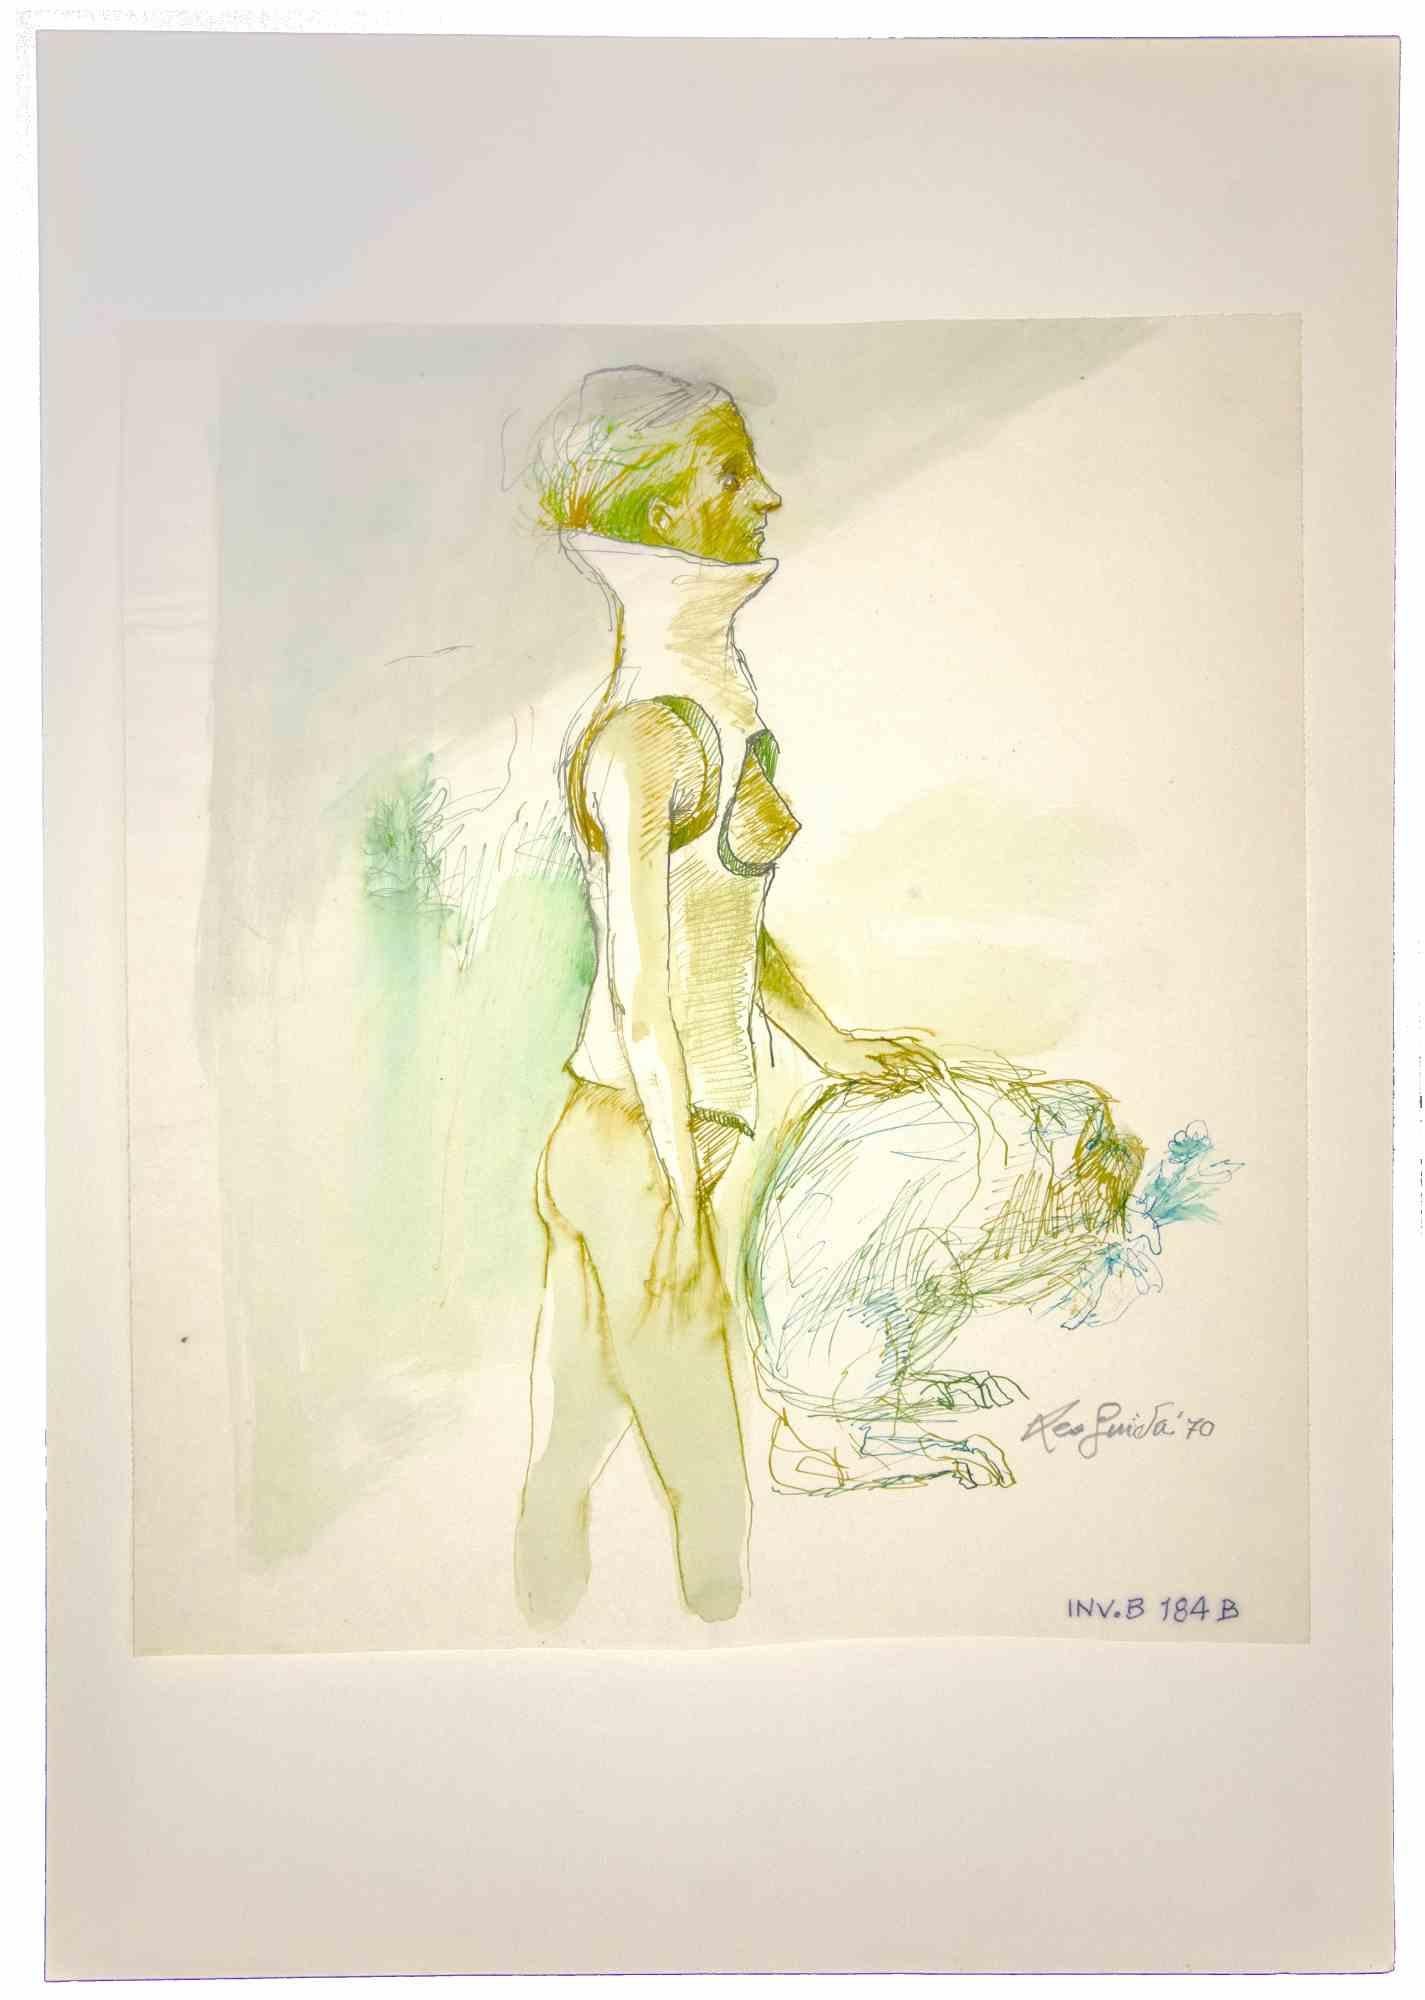 Nude is an original Contemporary artwork realized in the 1970s by the italian Contemporary artist Leo Guida (1992 - 2017).

Original drawing in watercolor and China ink on ivory-colored paper, glued on cardboard (50 x 35 cm).
Hand-signed and dated